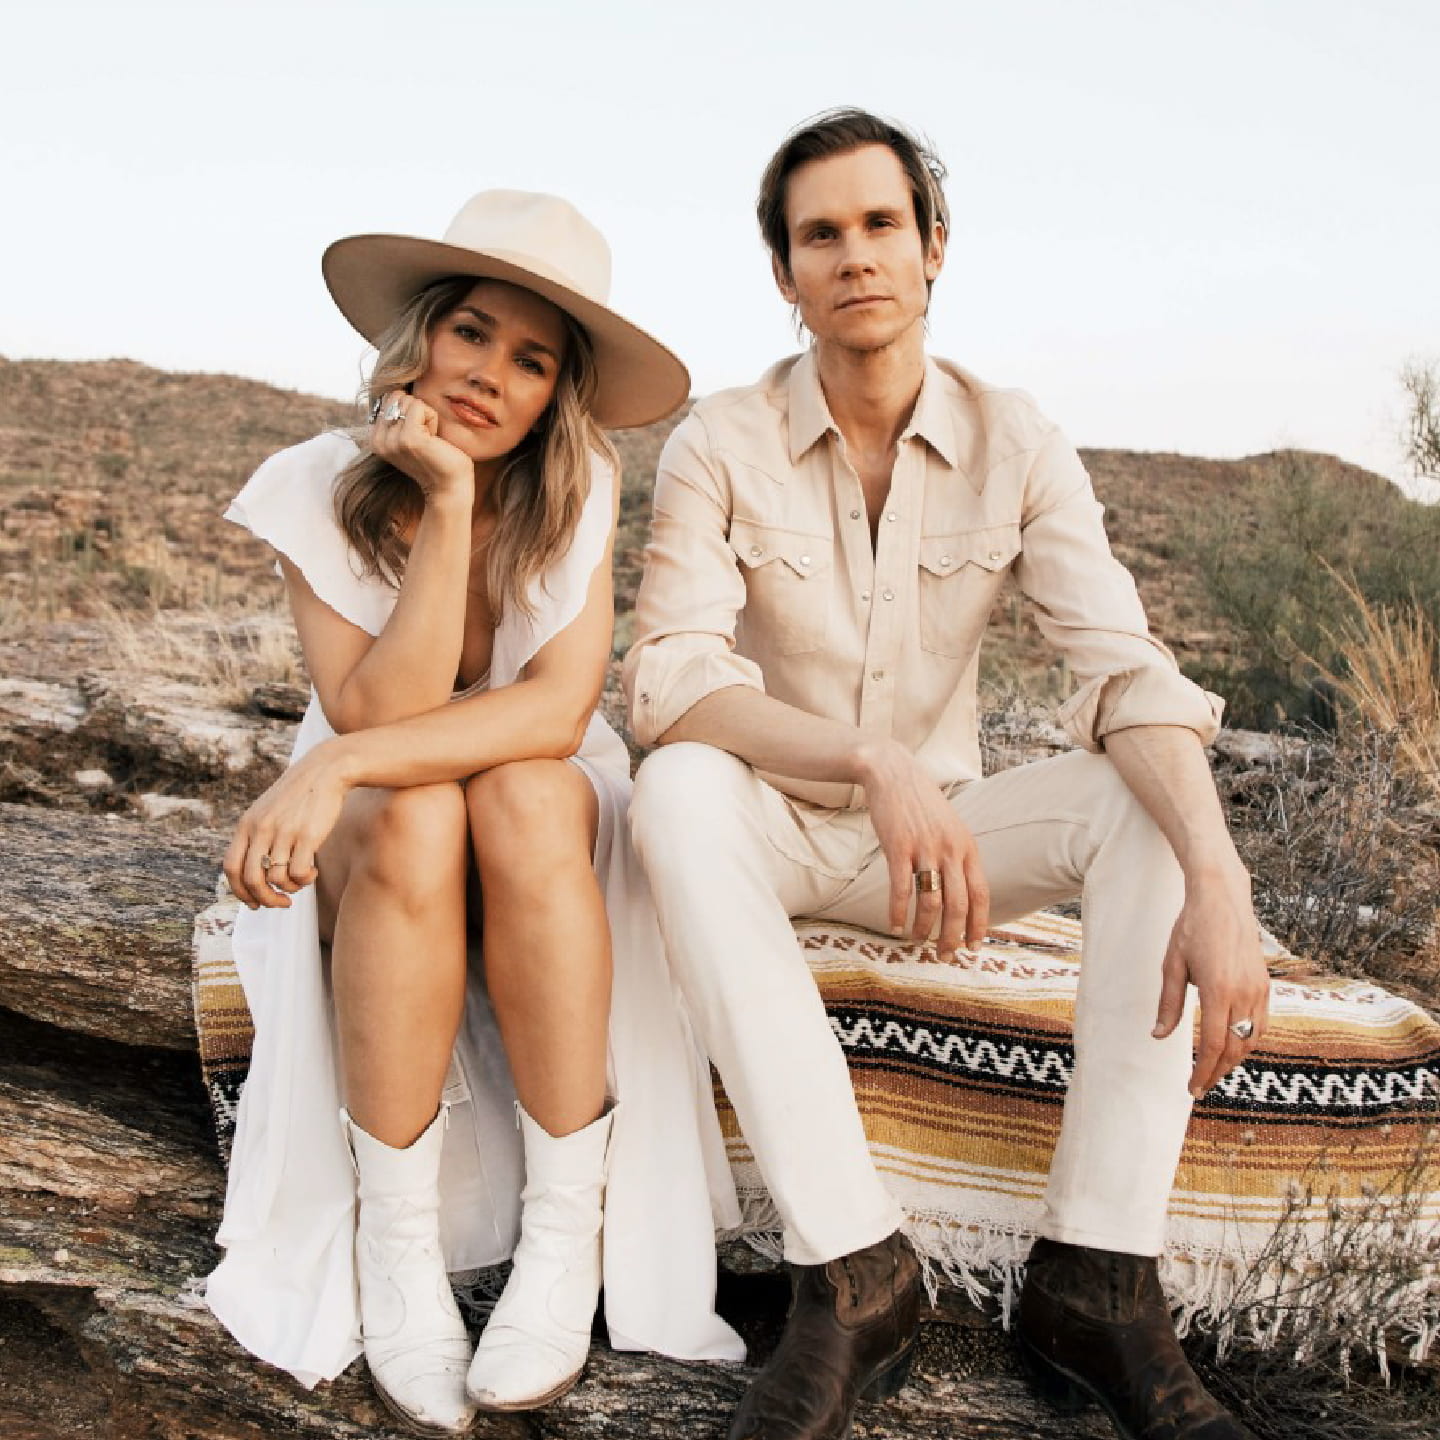 Lance and Lea pose on a southwestern blanket in a desert scene